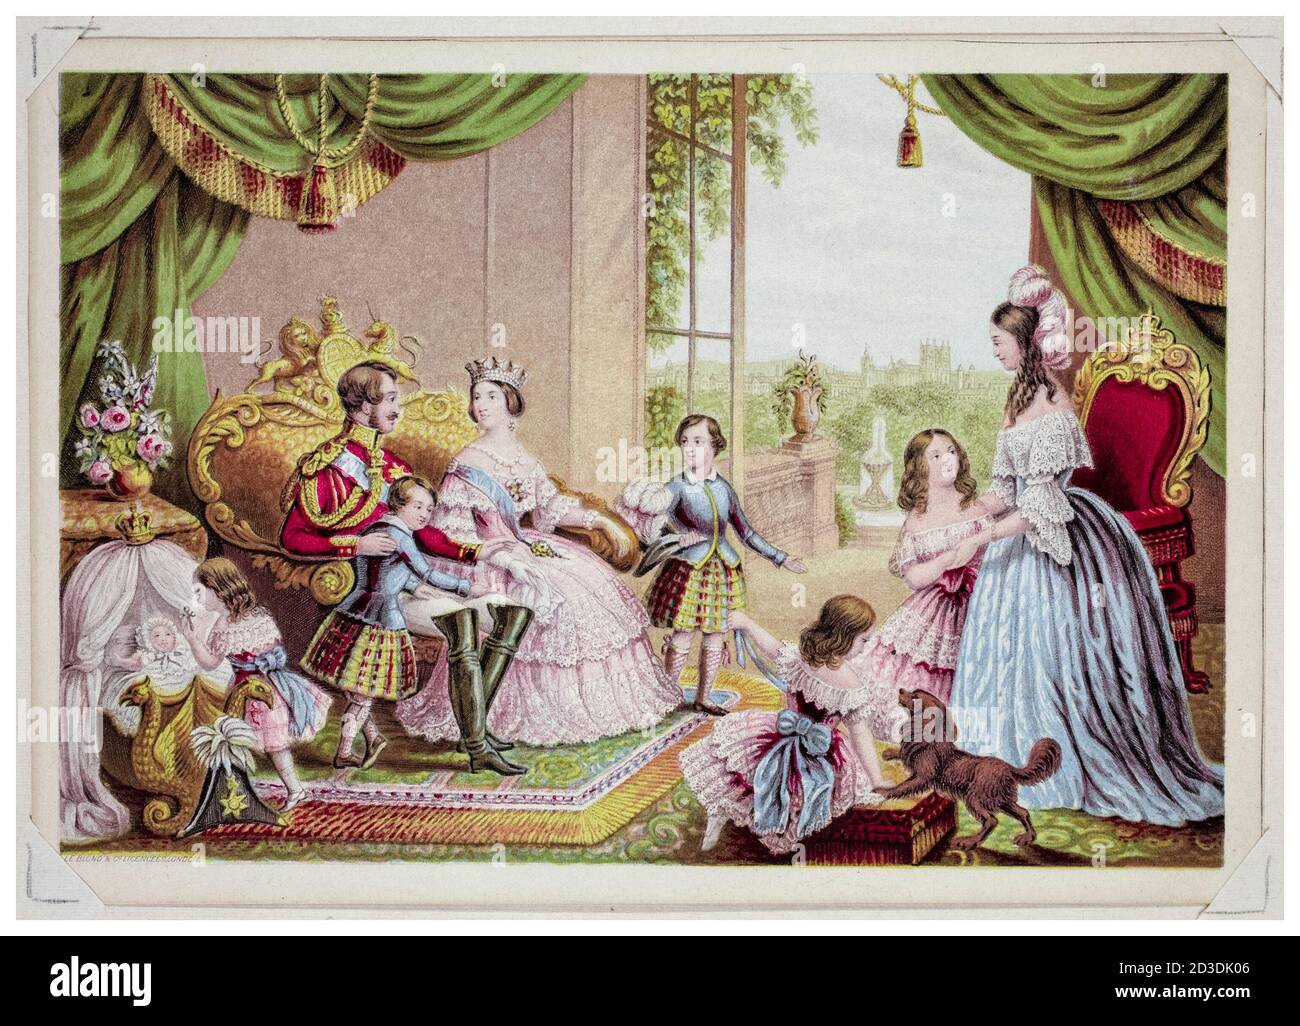 Queen Victoria, Prince Albert the Prince Consort and the Royal Family at Buckingham Palace, print by Le Blond & Co, circa 1845 Stock Photo